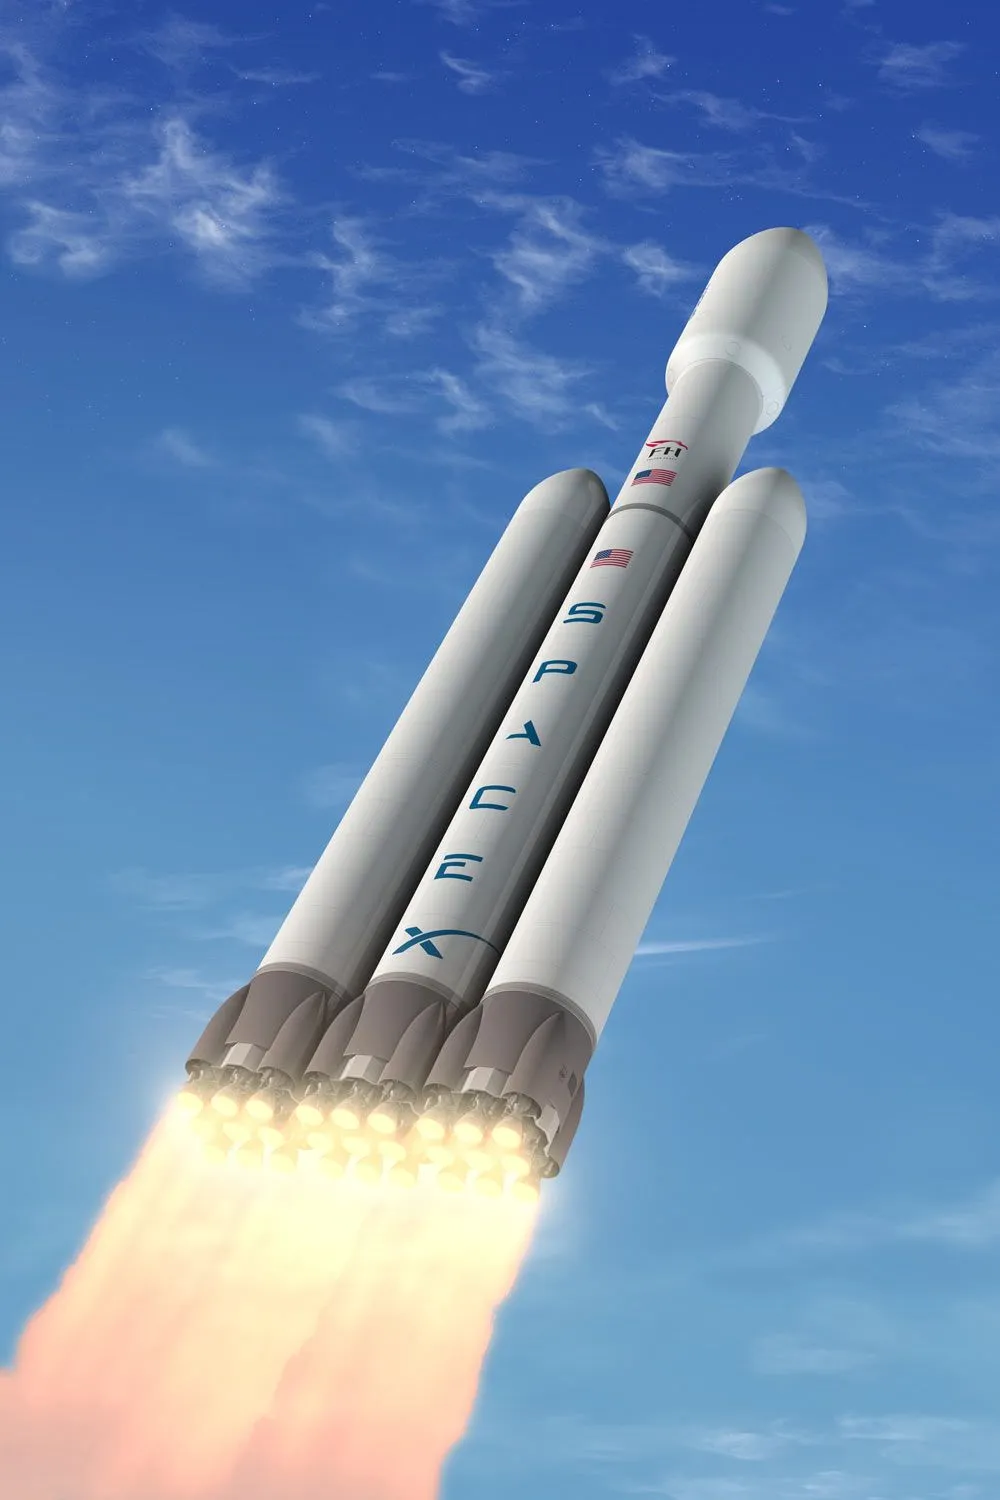 Starship and Super Heavy booster preparing for launch, emphasizing the two-stage rocket's design and capabilities.